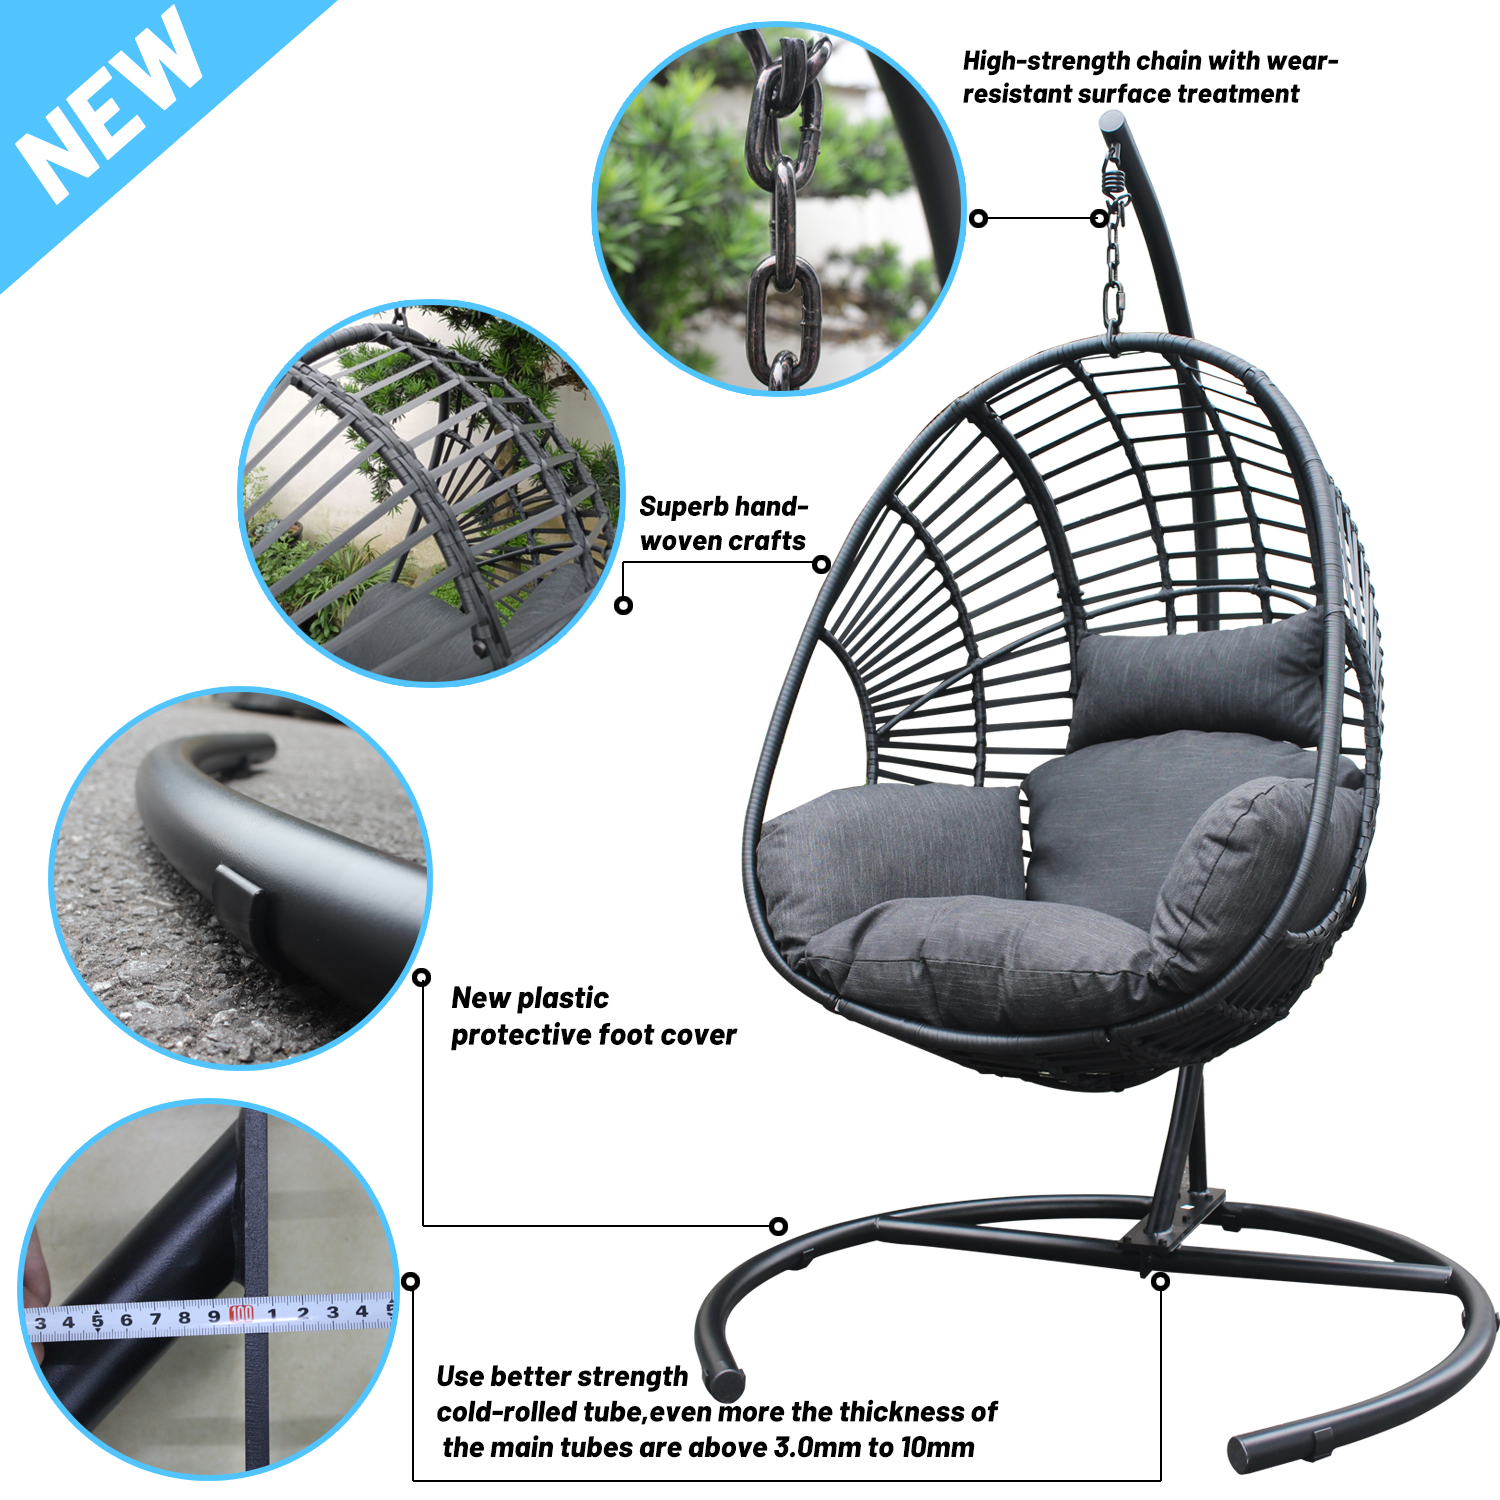 High Quality Outdoor Indoor Wicker Swing Egg Chair W400S00007